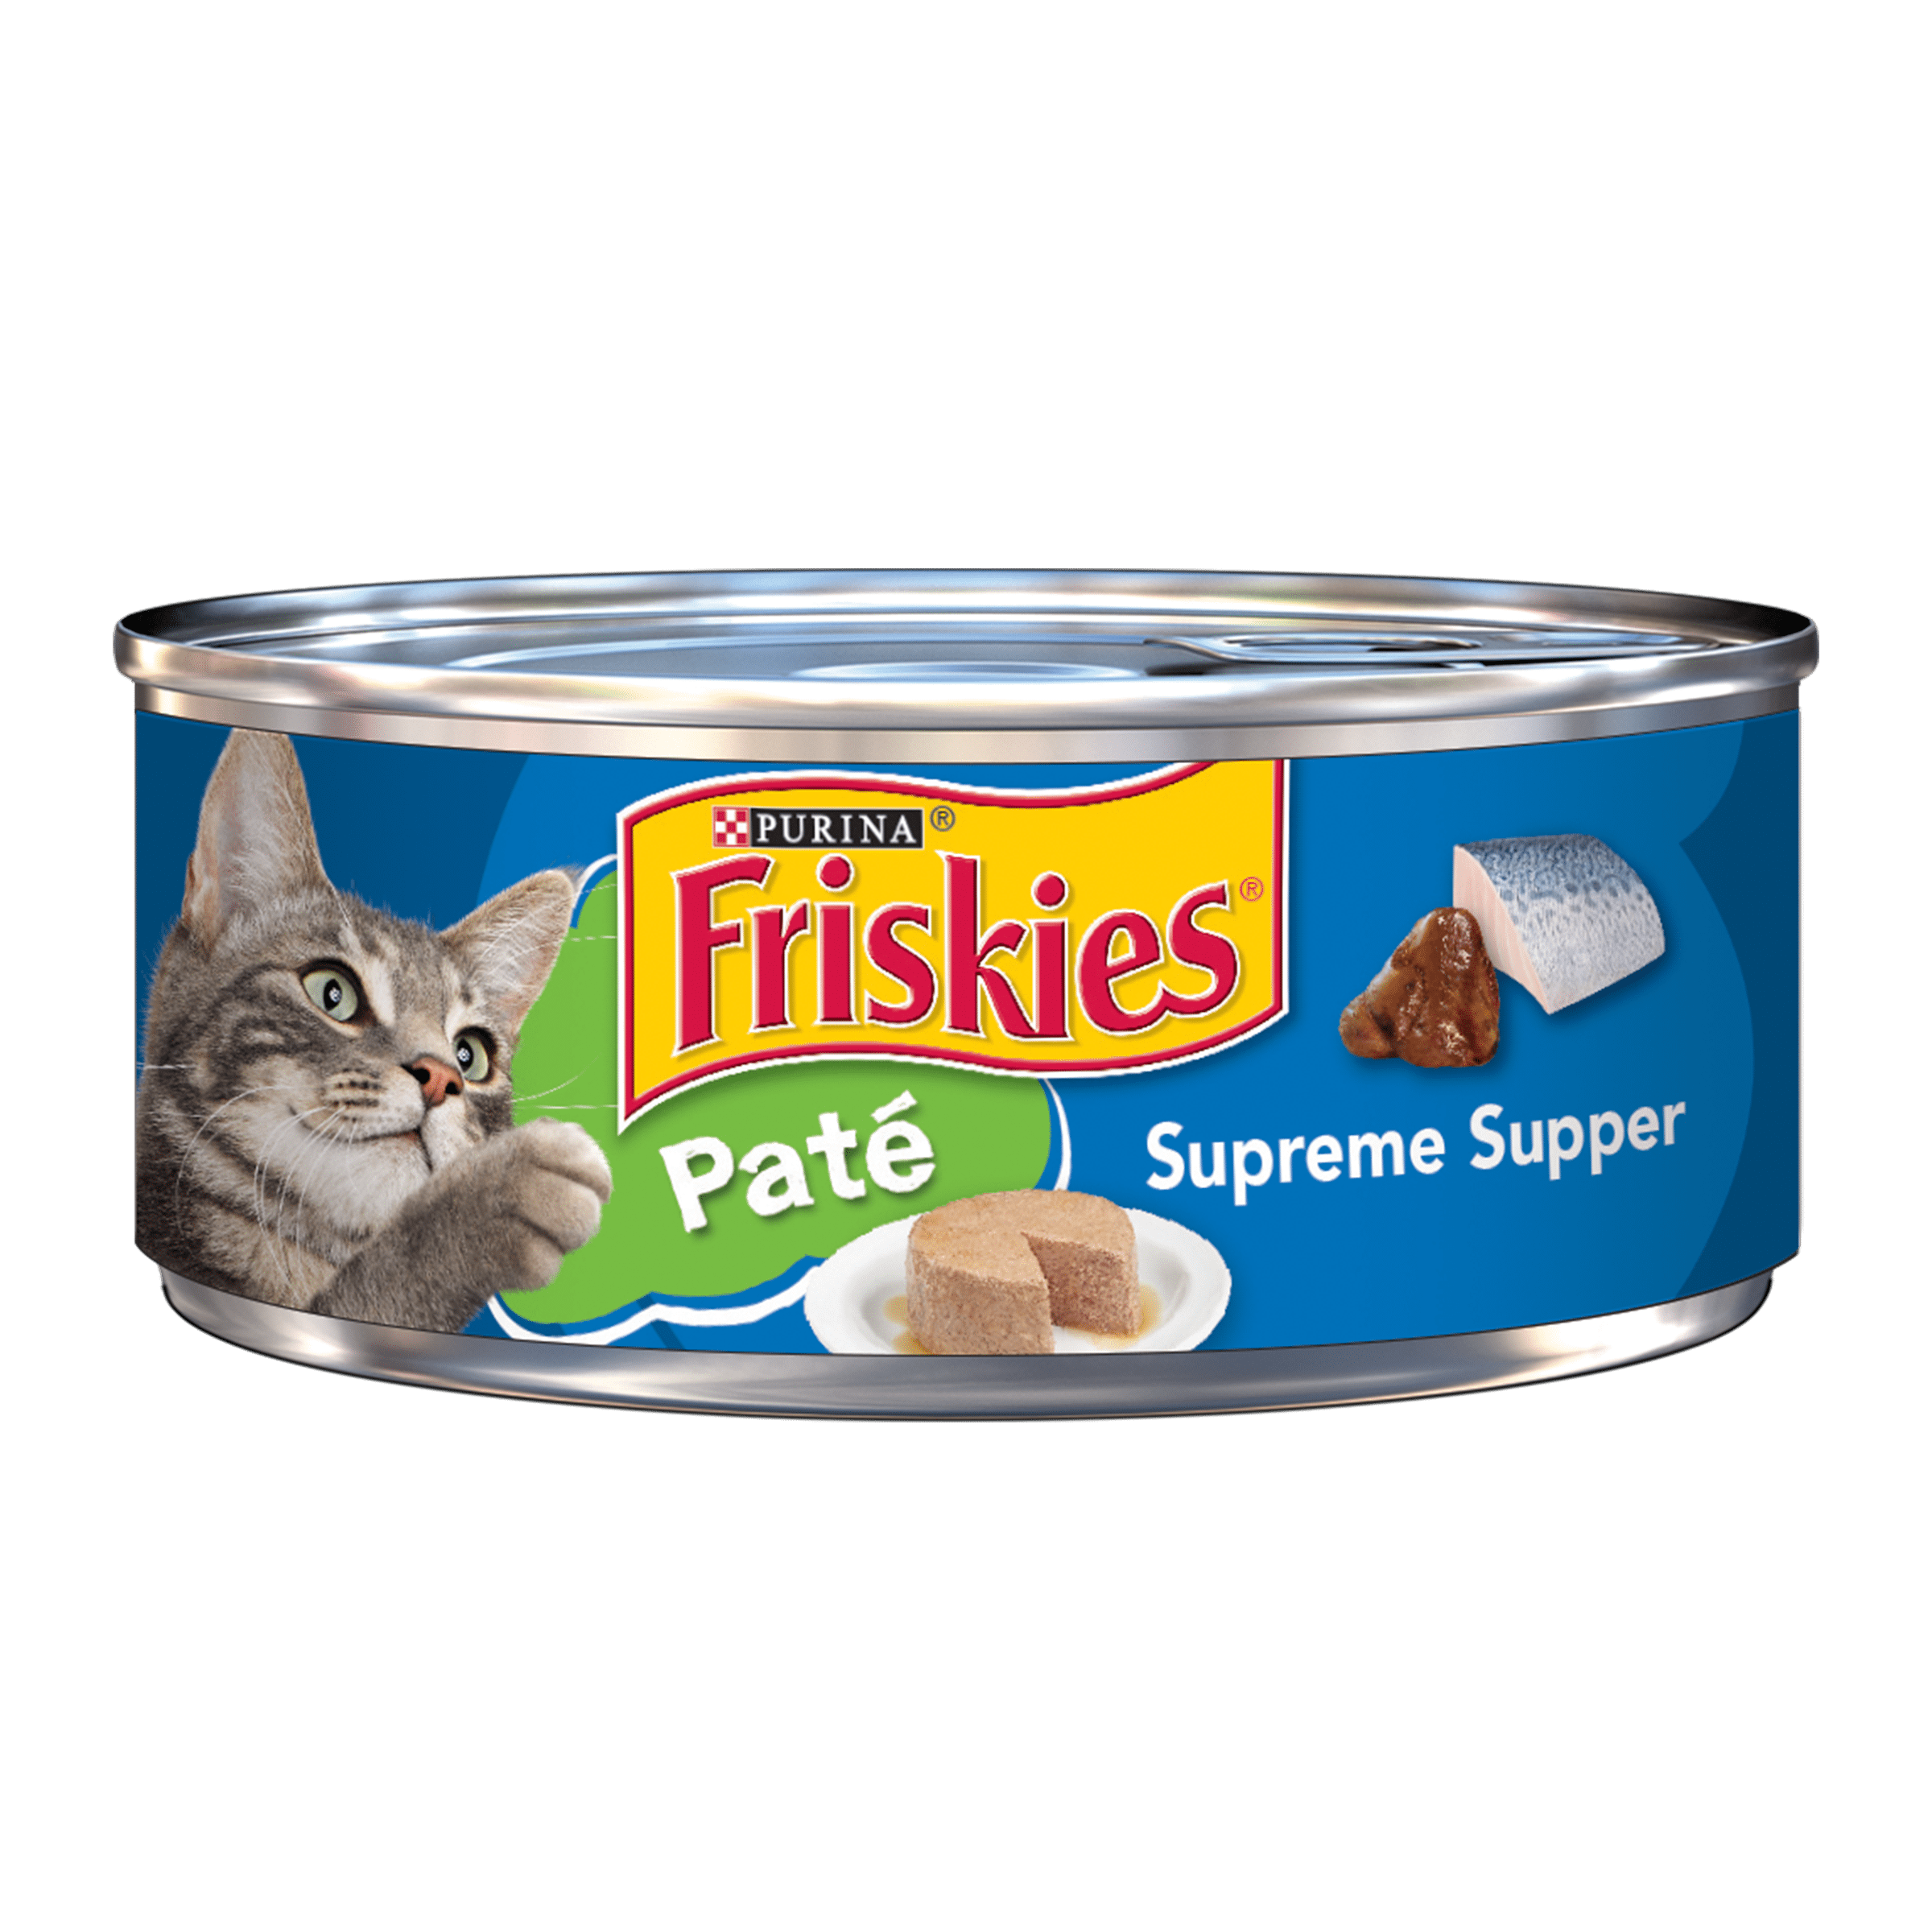 Friskies Pate Wet Cat Food, Pate Supreme Supper 5.5 oz. Can